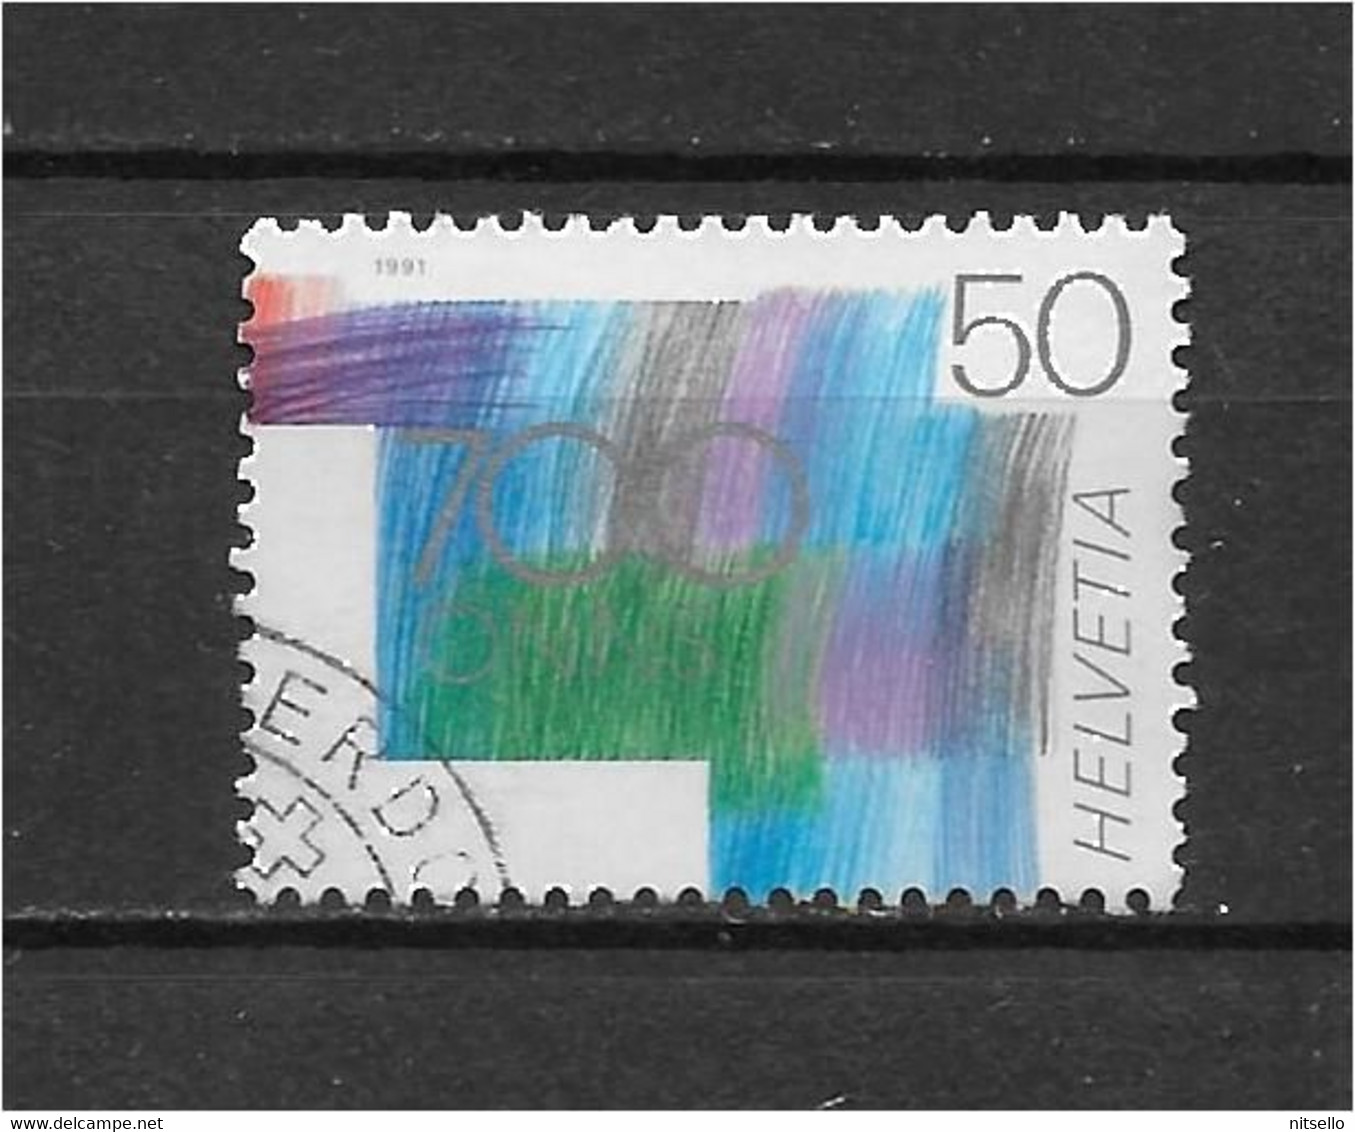 LOTE 1530A /// SUIZA YVERT Nº: 1369  ¡¡¡ OFERTA - LIQUIDATION - JE LIQUIDE !!! - Used Stamps